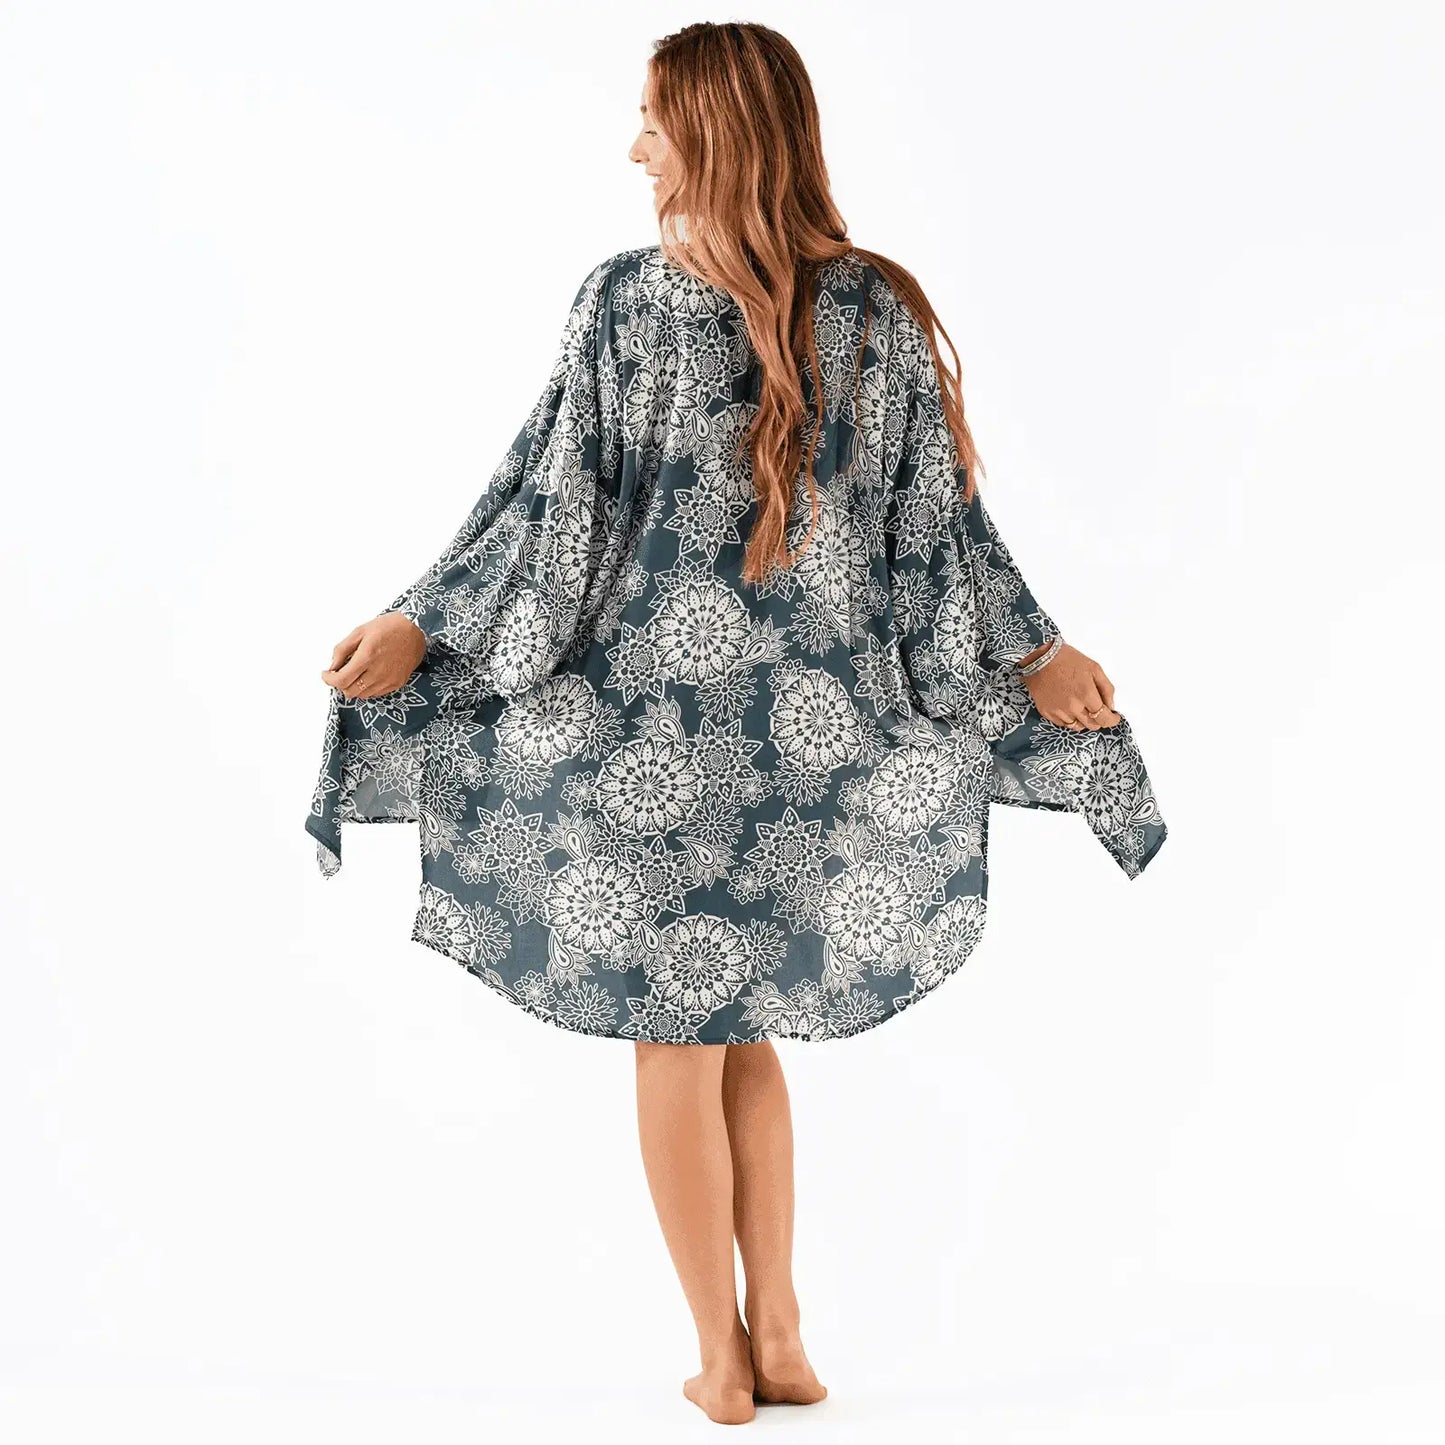 Corfu Teal and White Lace Print Kimono Swimsuit Cover Up - back view